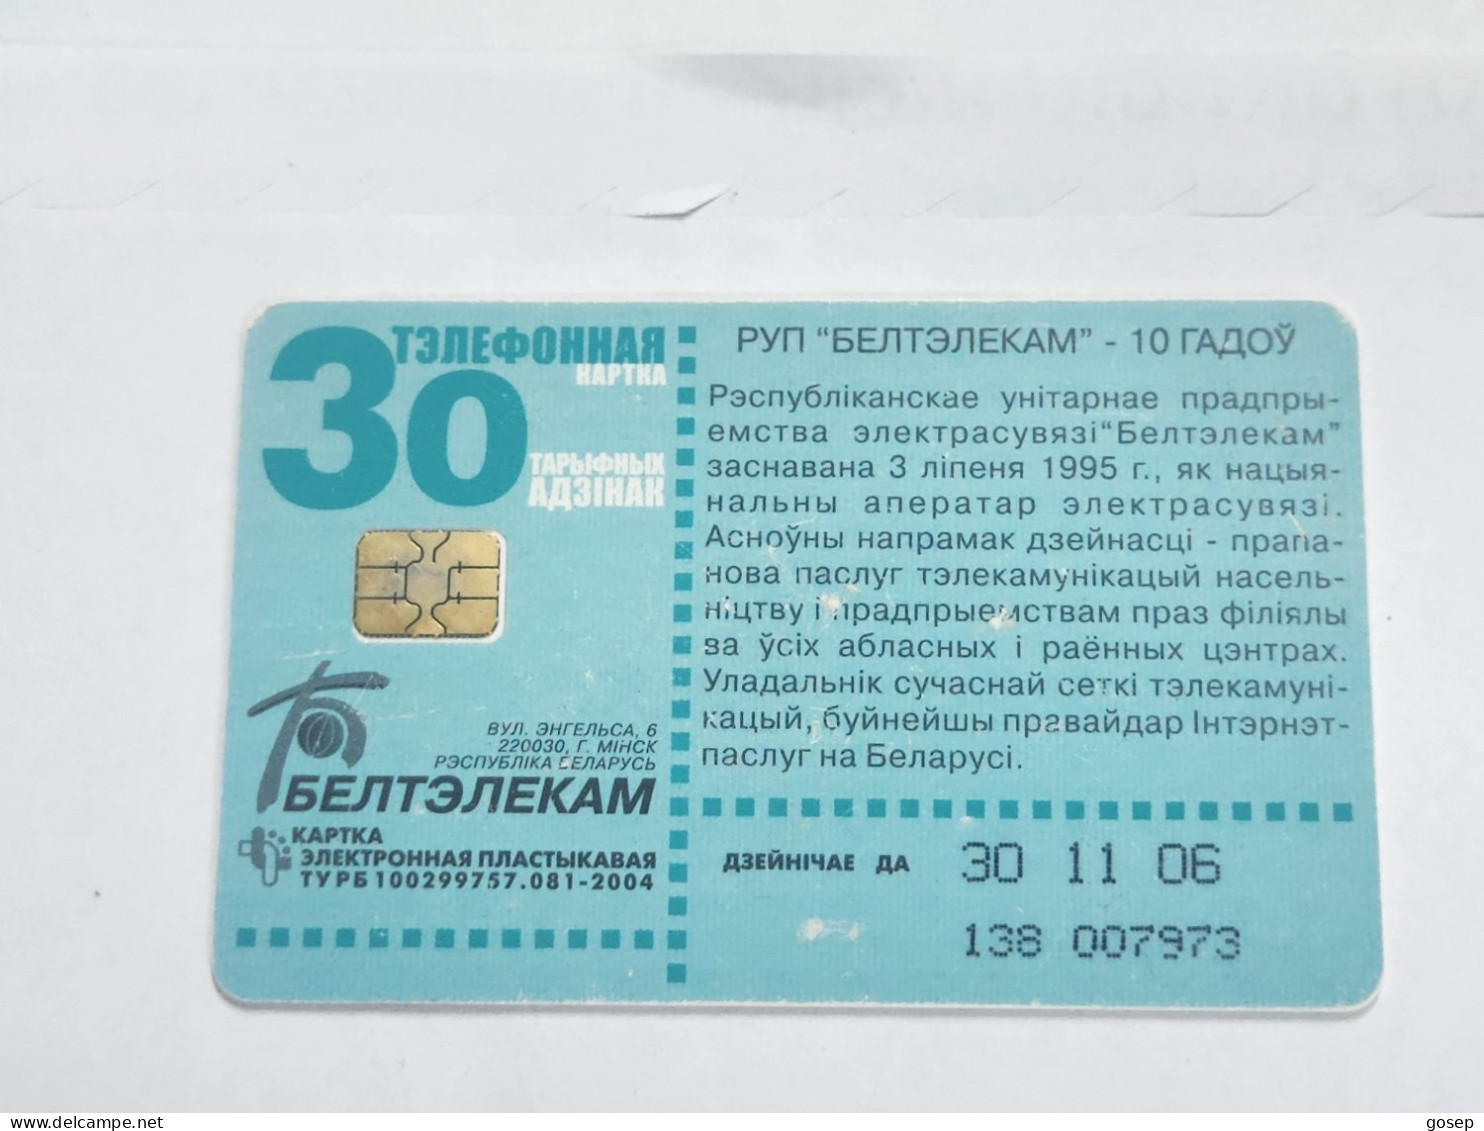 BELARUS-(BY-BLT-138a)-10th Anniversary-(117)(GOLD CHIP)(007973)(tirage-335.000)used Card+1card Prepiad Free - Belarus